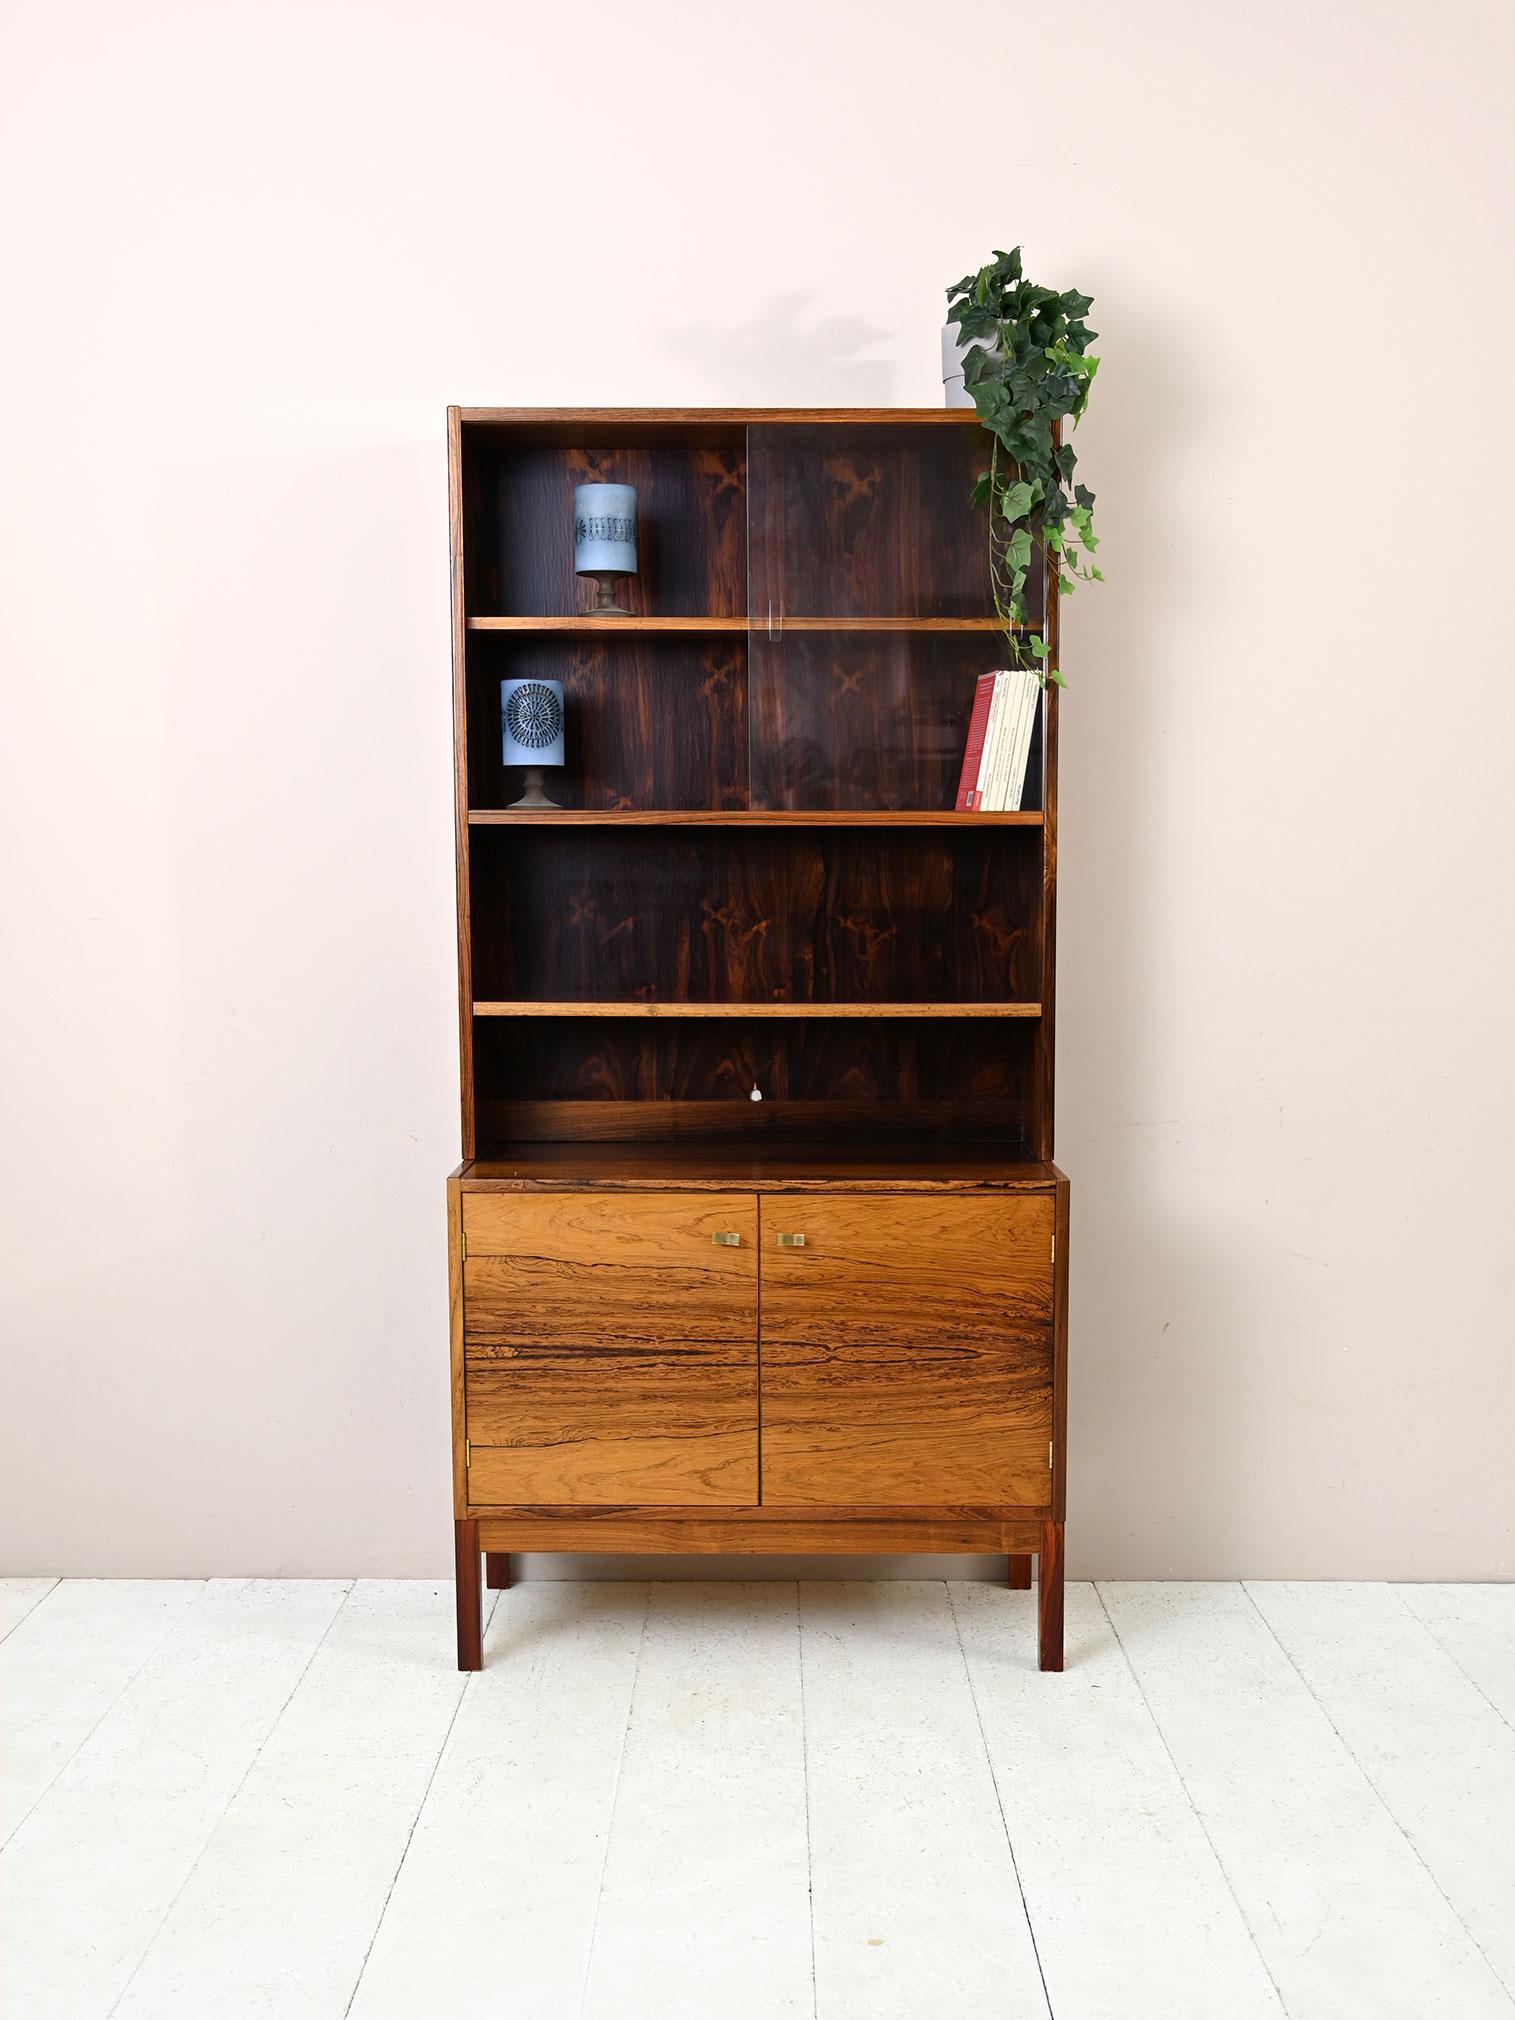 1960s modern antique bookcase sideboard.
 
Consists of a cabinet with hinged doors on which the shelving system rests. At the top, the shelves are closed by a display cabinet.
The precious rosewood and refined finish make it a piece of timeless